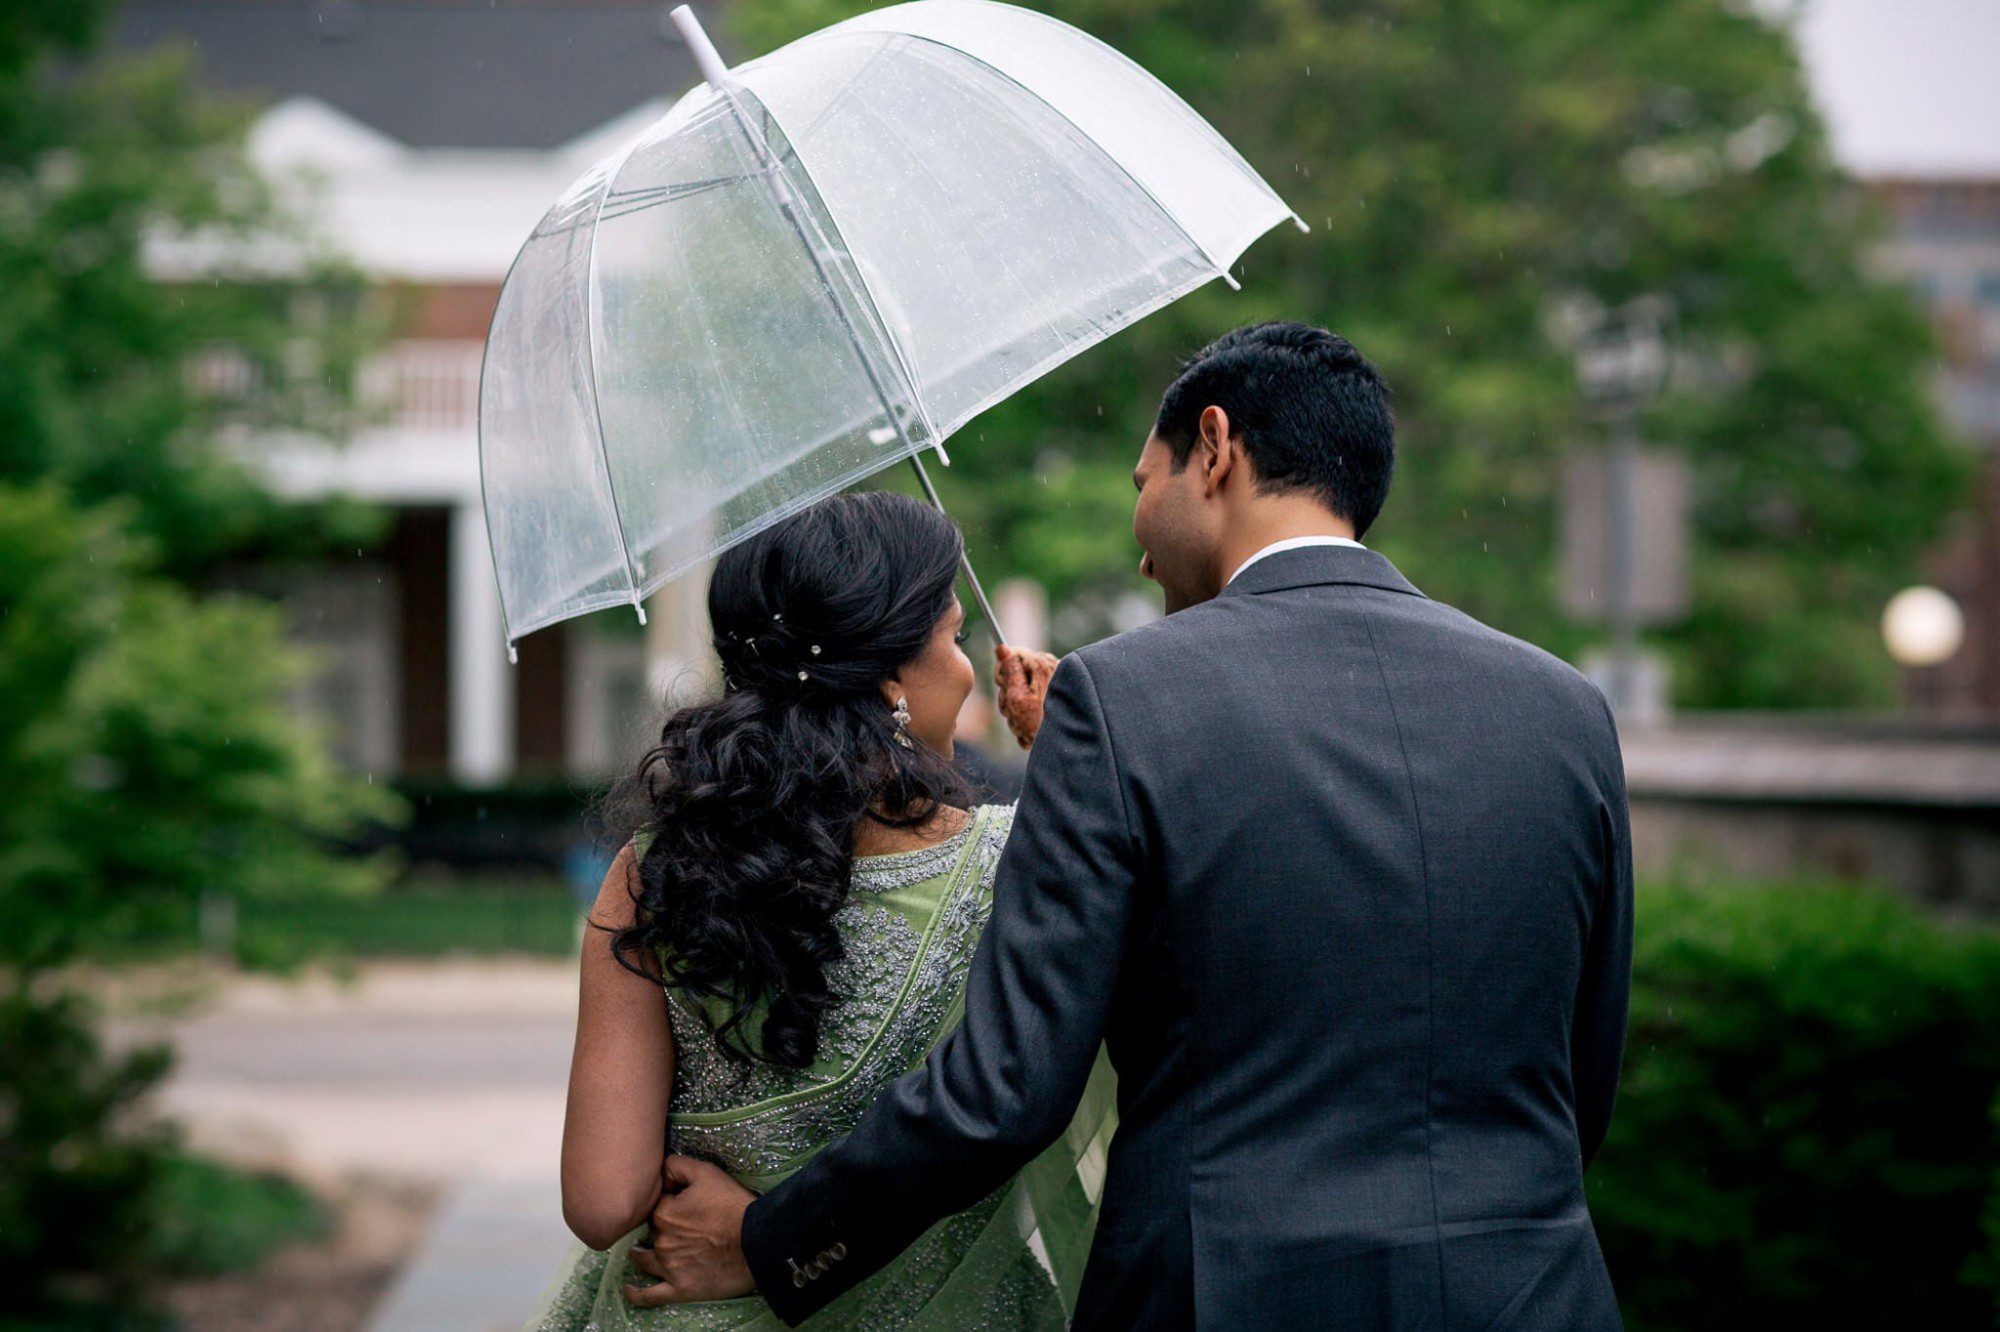 bride and groom walking in the rain under clear umbrella